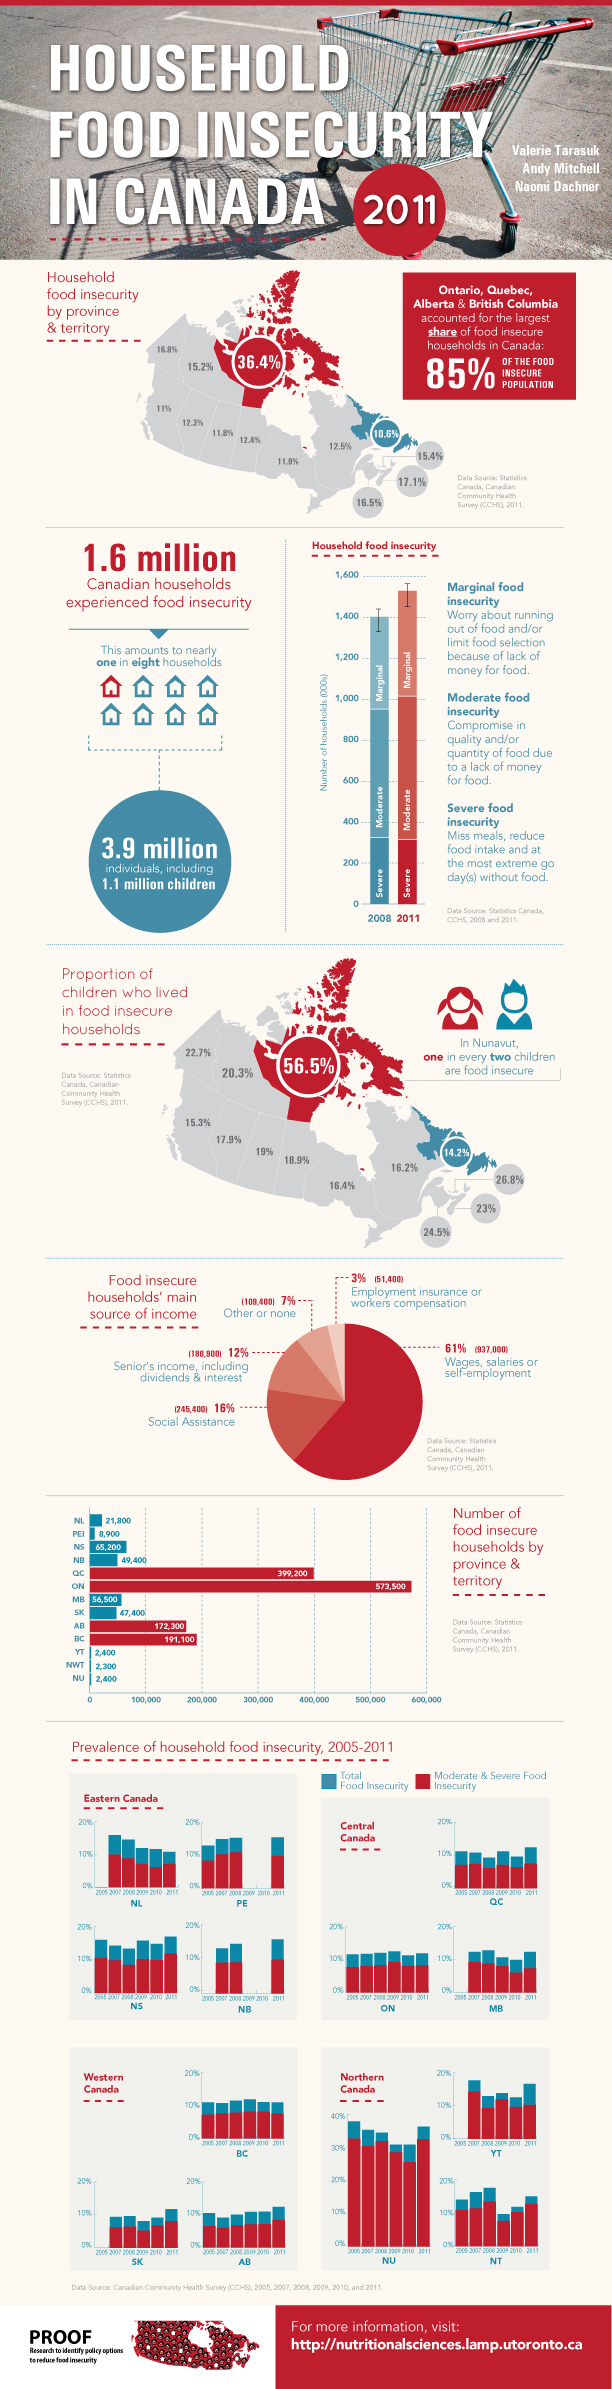 Food Insecurity 2011 Infographic